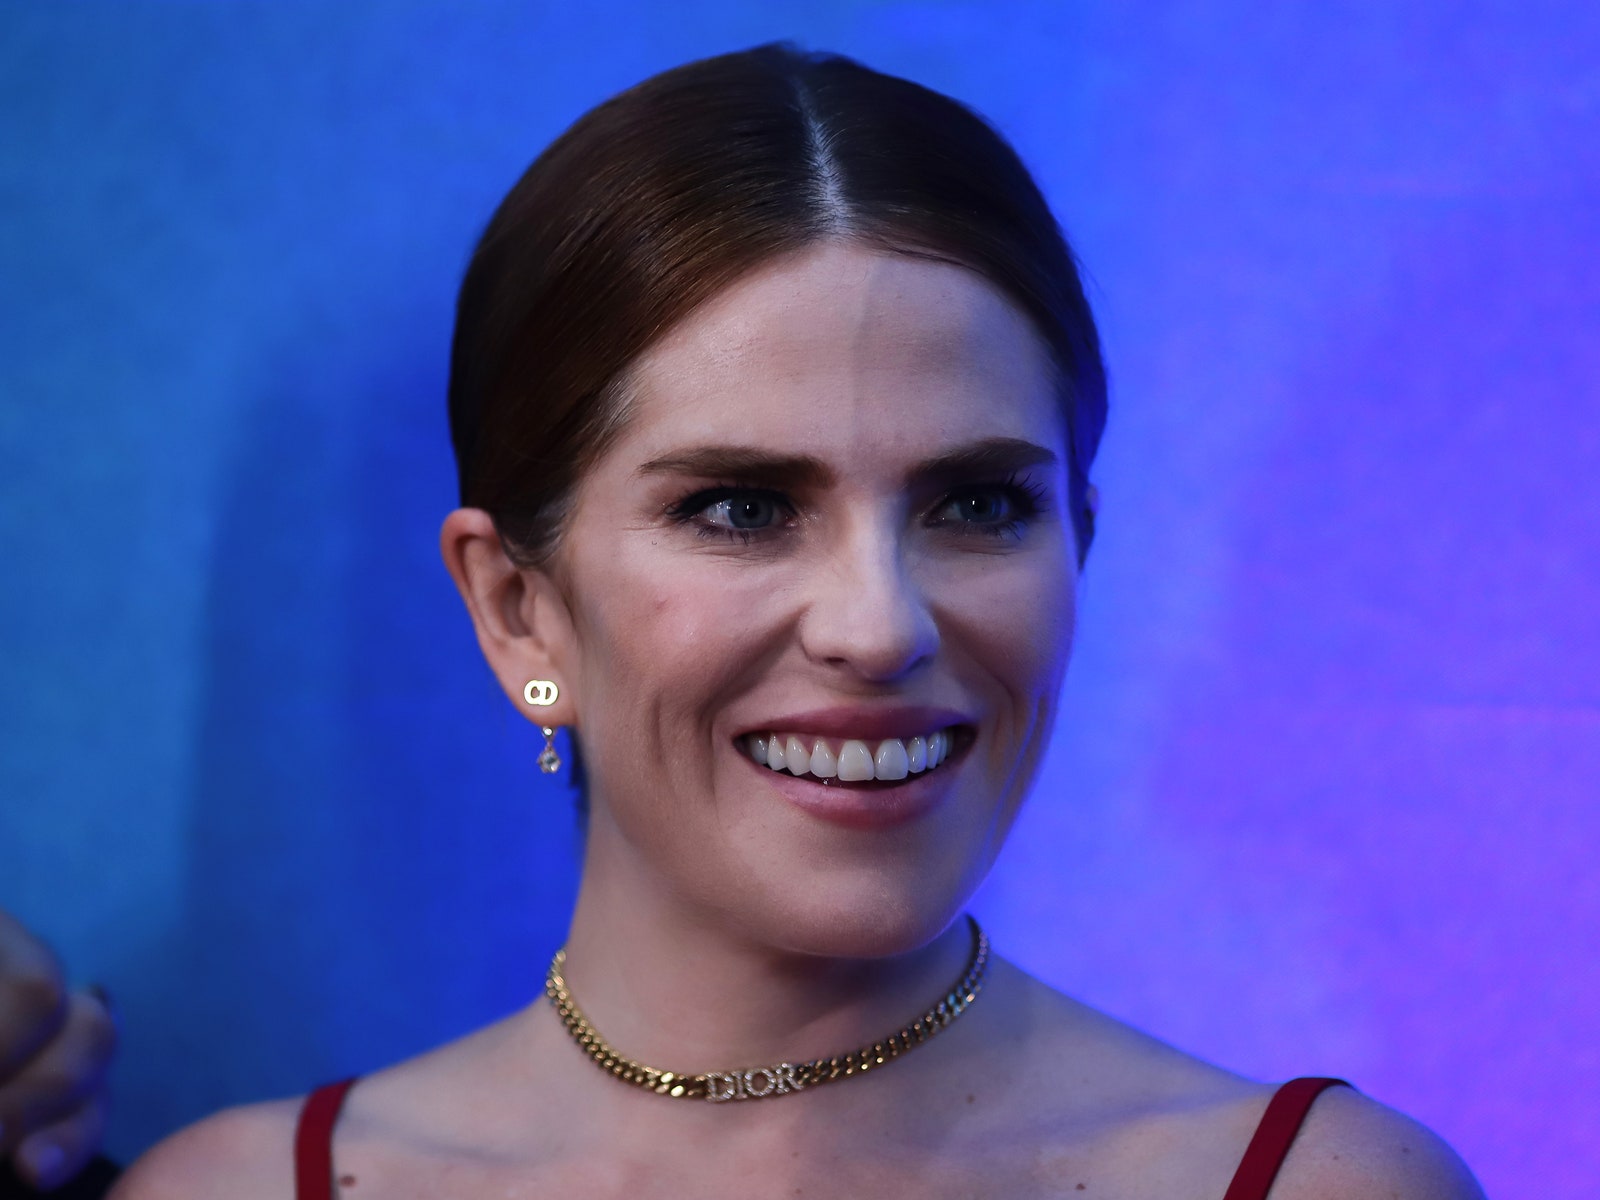 Karla Souza smiling at a red carpet event